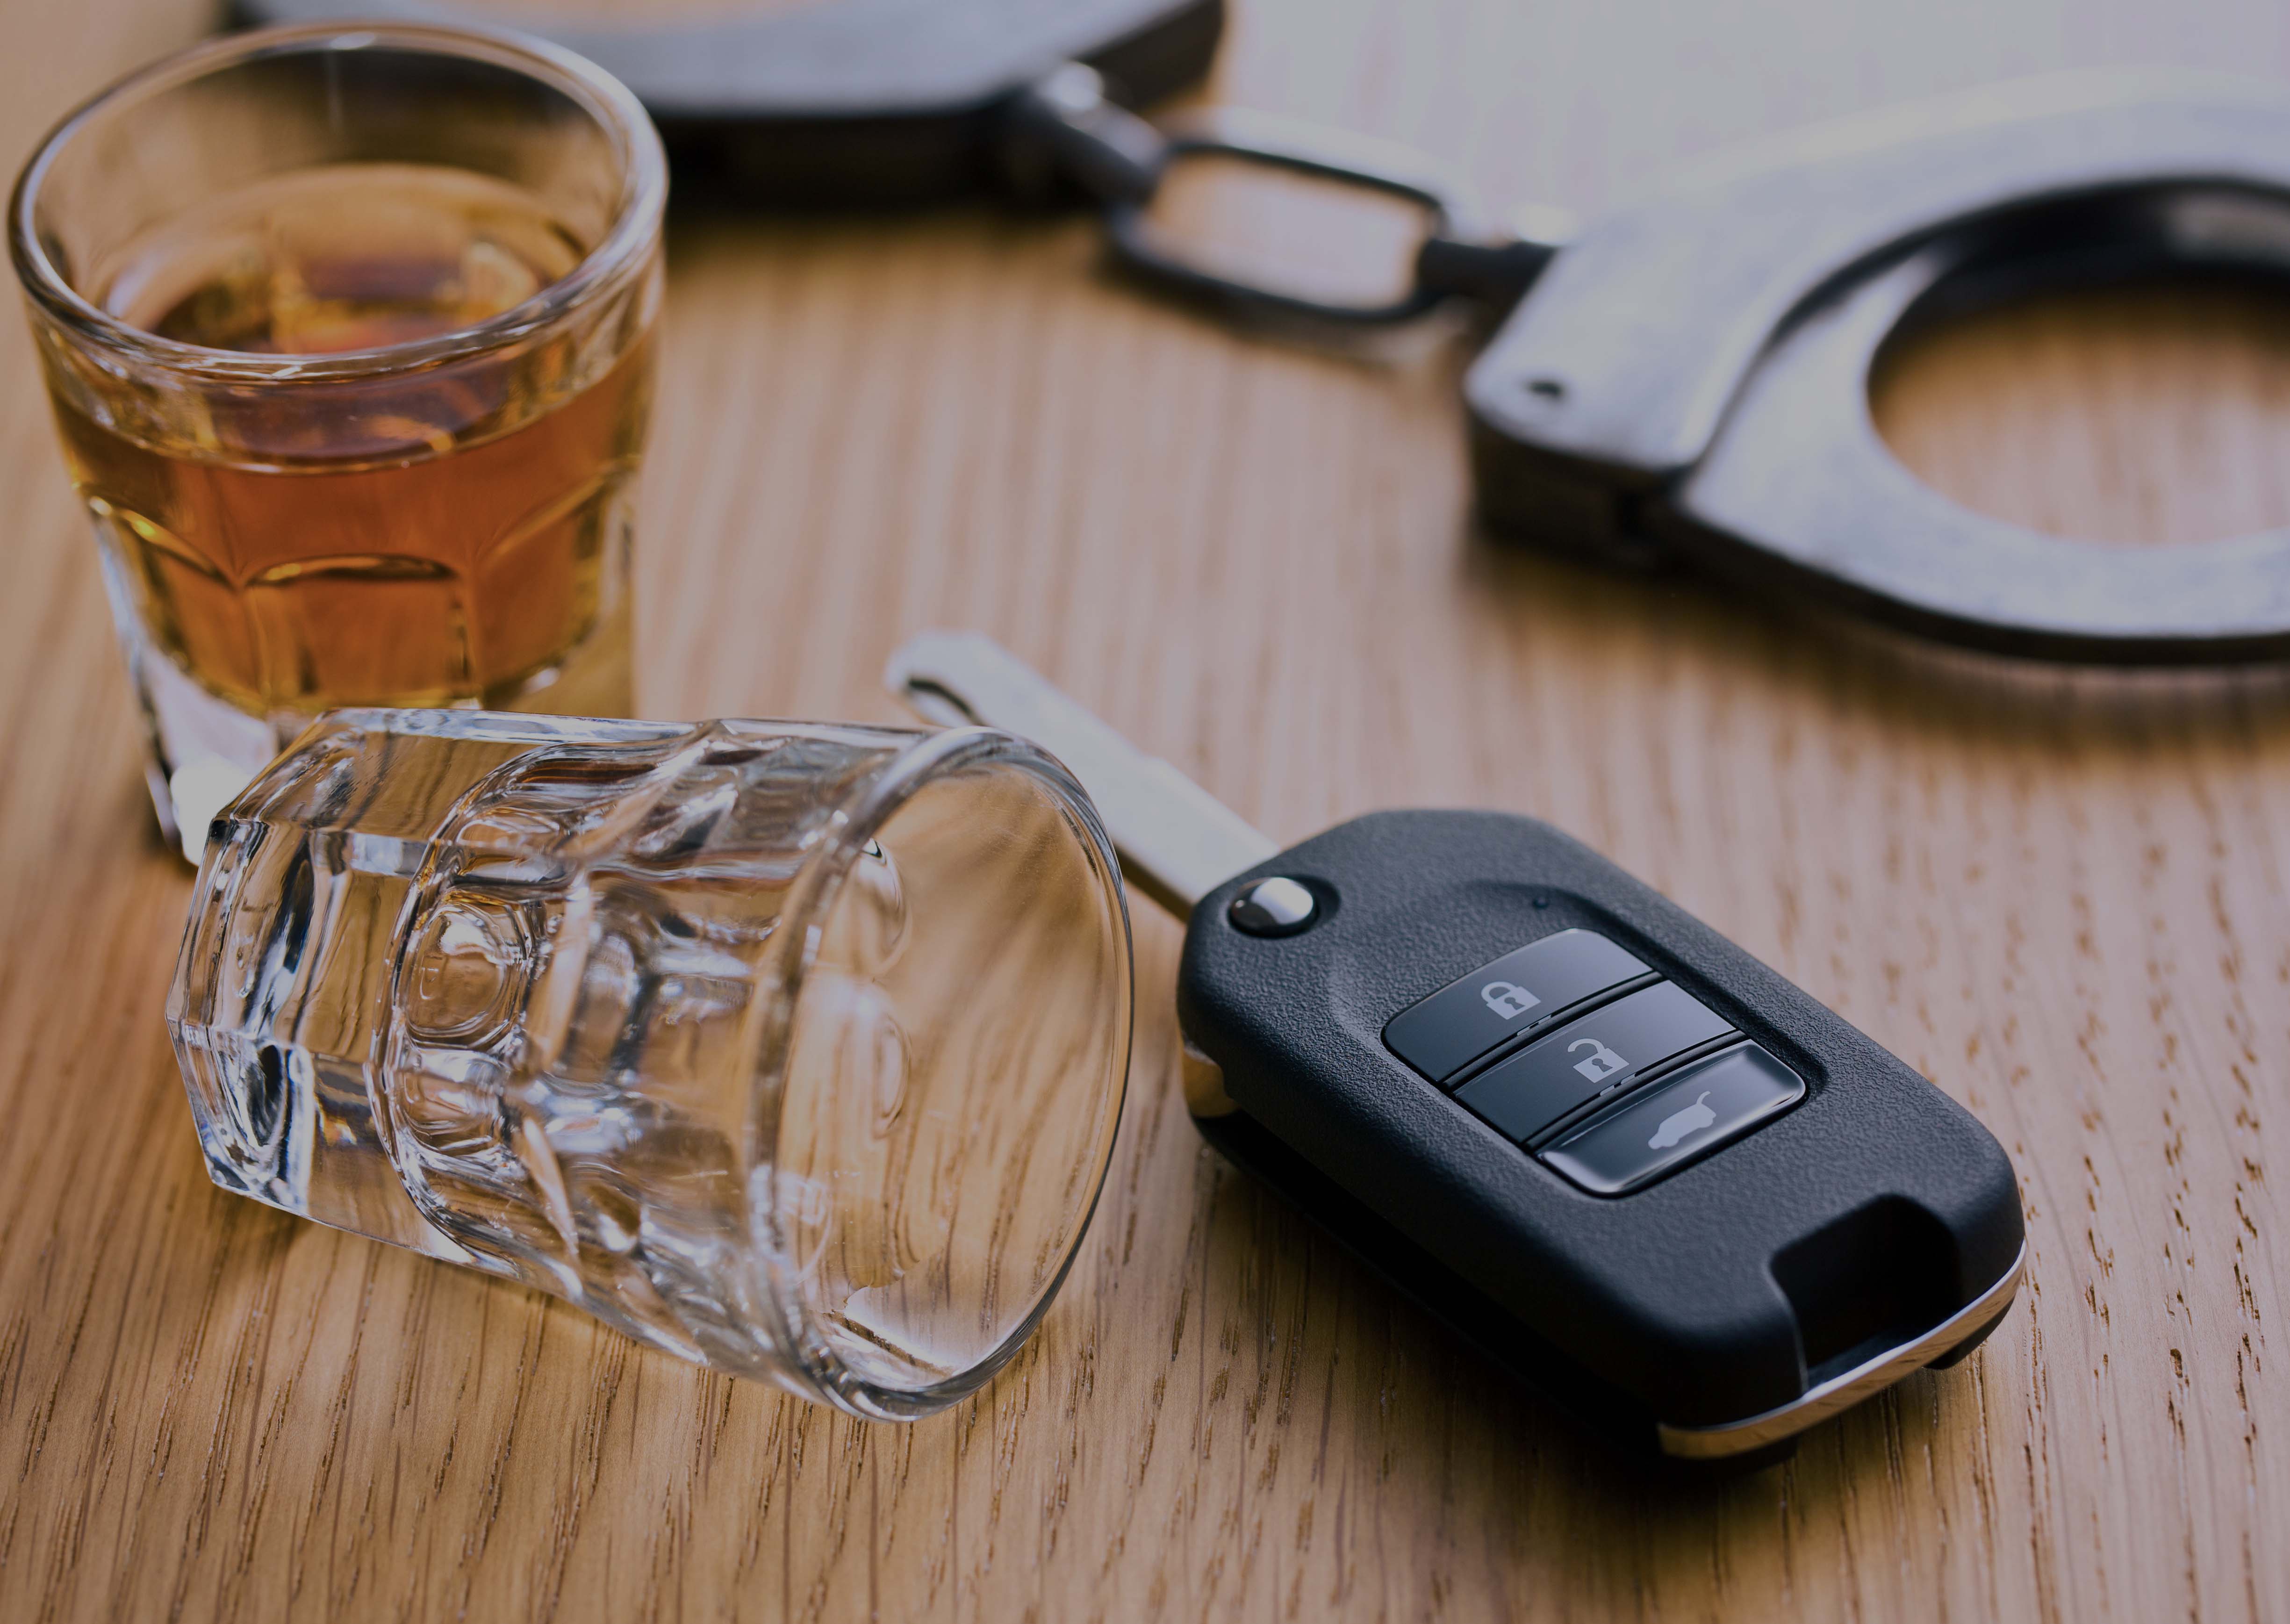 DUI lawyer for driving under the influence charges in Tempe, Arizona